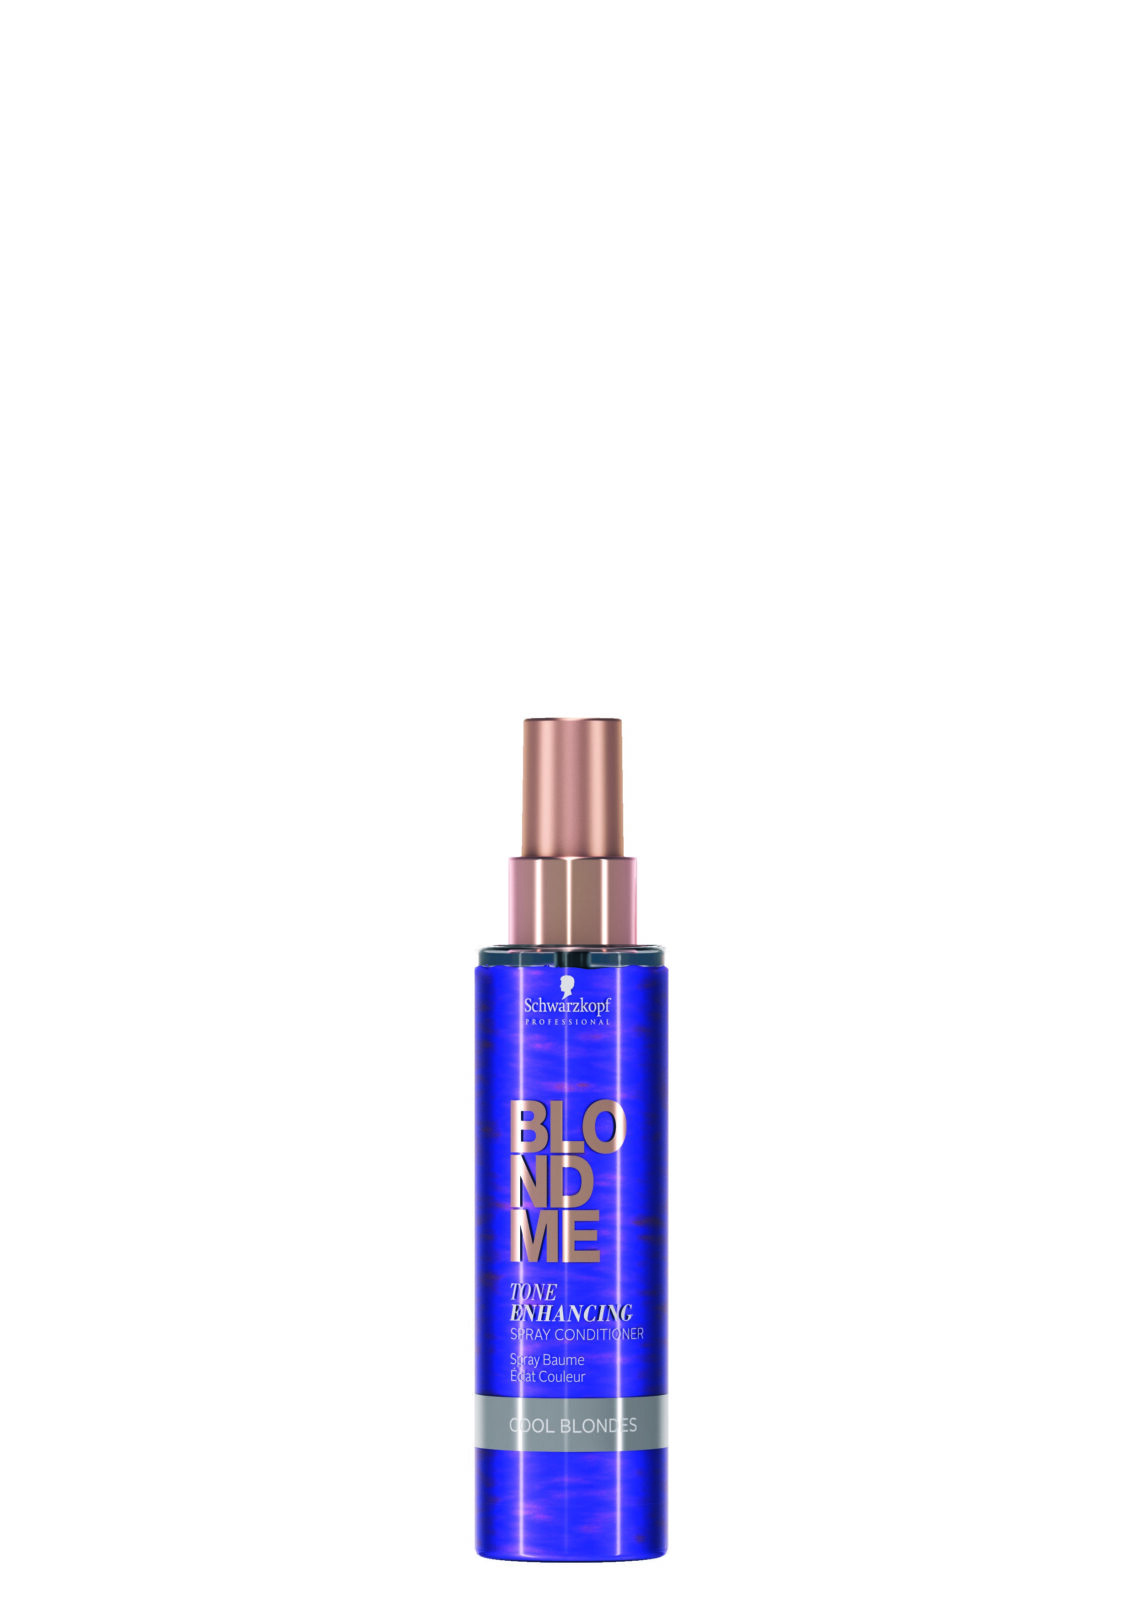 BLONDME Tone Enhancing Spray Conditioner for Cool Blondes